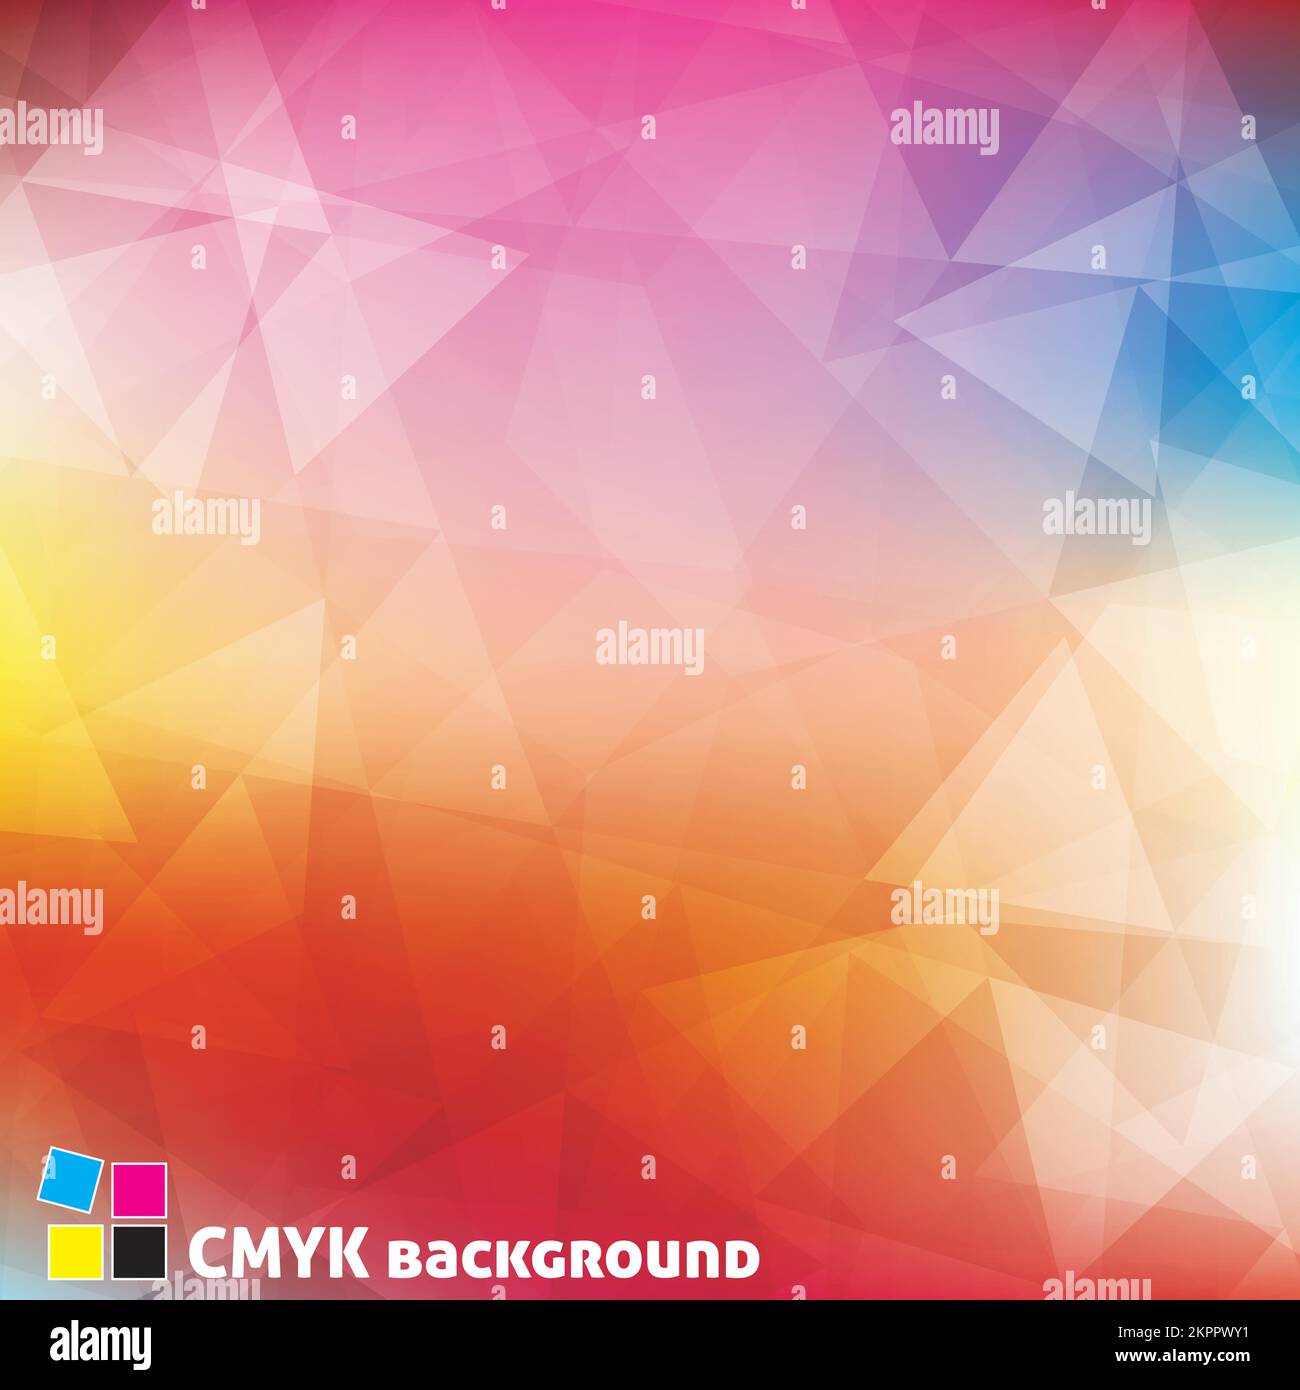 Bright colors pattern textured by triangles. Colorful vector background. CMYK color mode Stock Vector